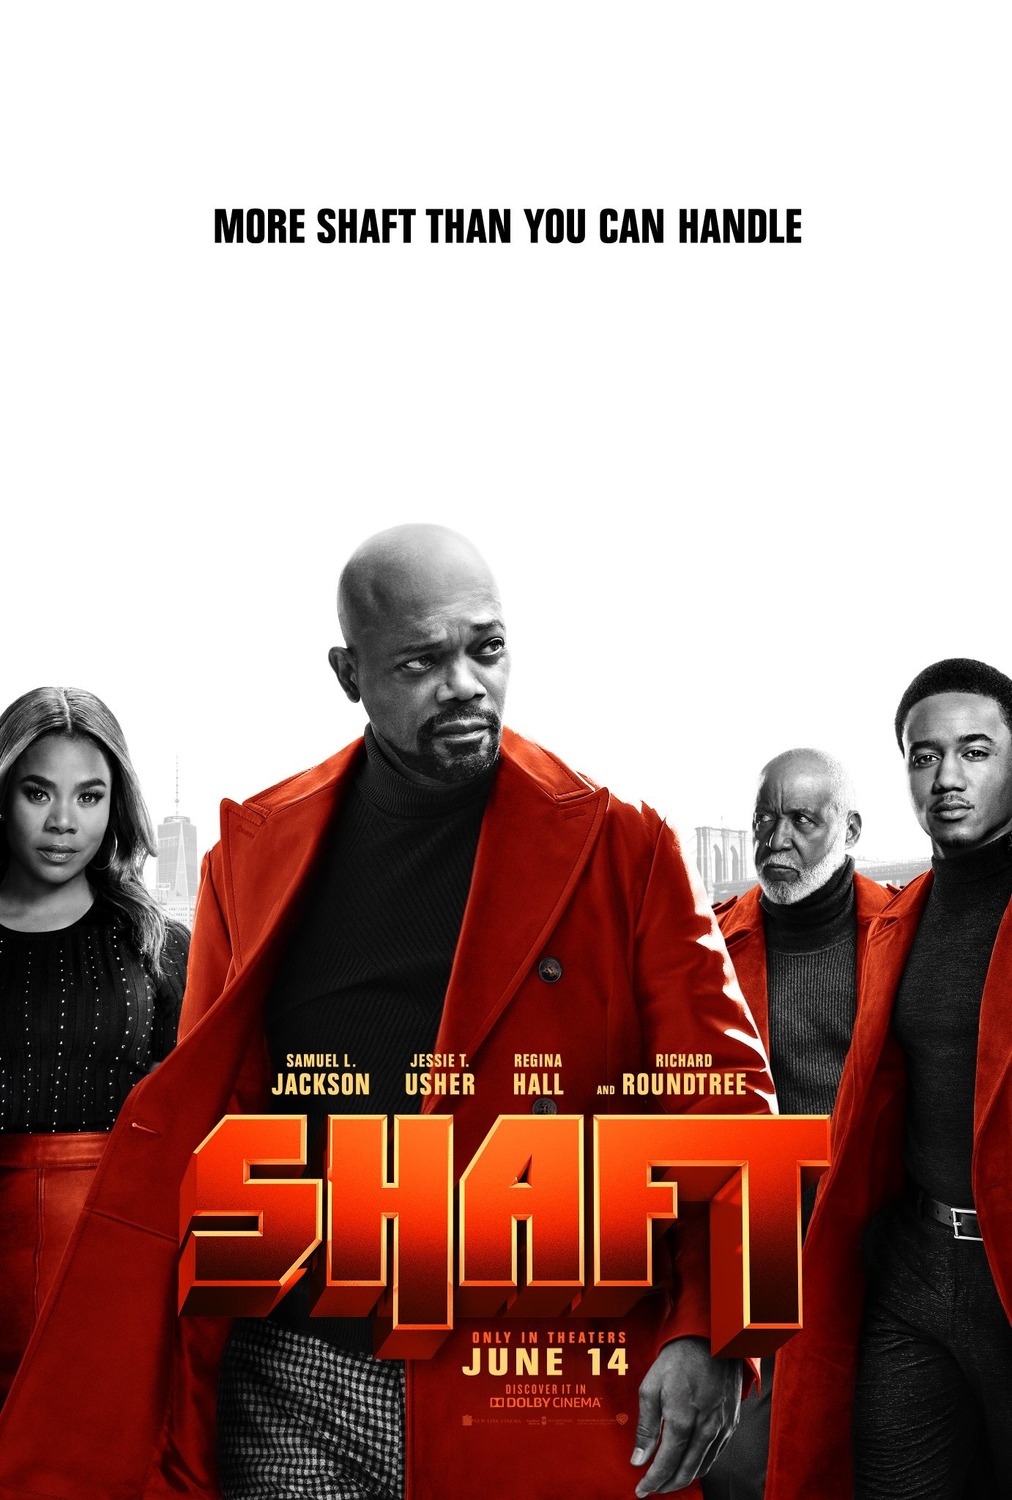 Extra Large Movie Poster Image for Shaft (#1 of 7)